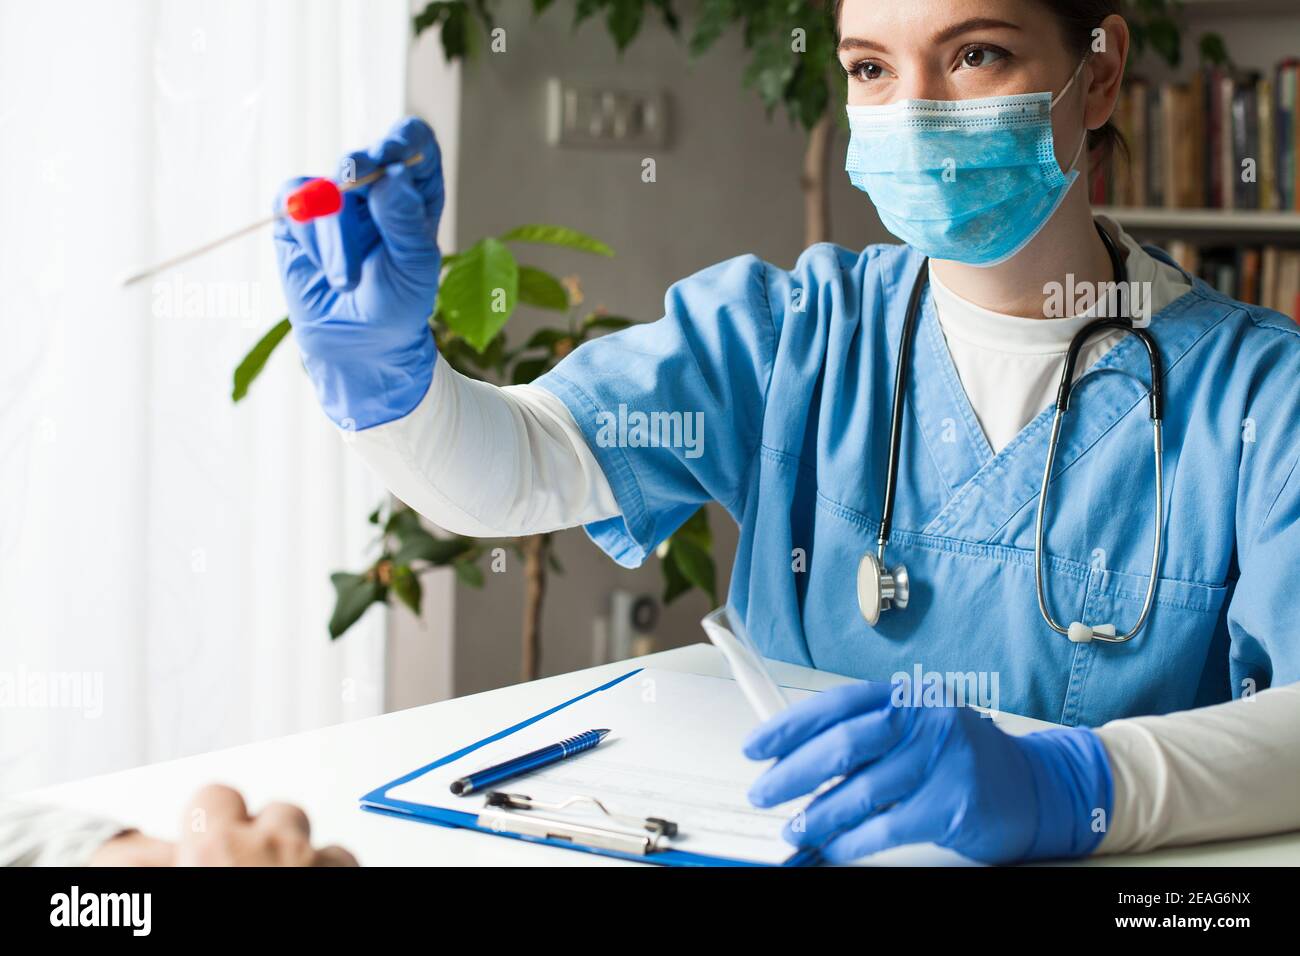 Female caucasian doctor holding a swab collection stick, nasal and oral specimen swabbing in doctor's office, patient PCR testing procedure appointmen Stock Photo